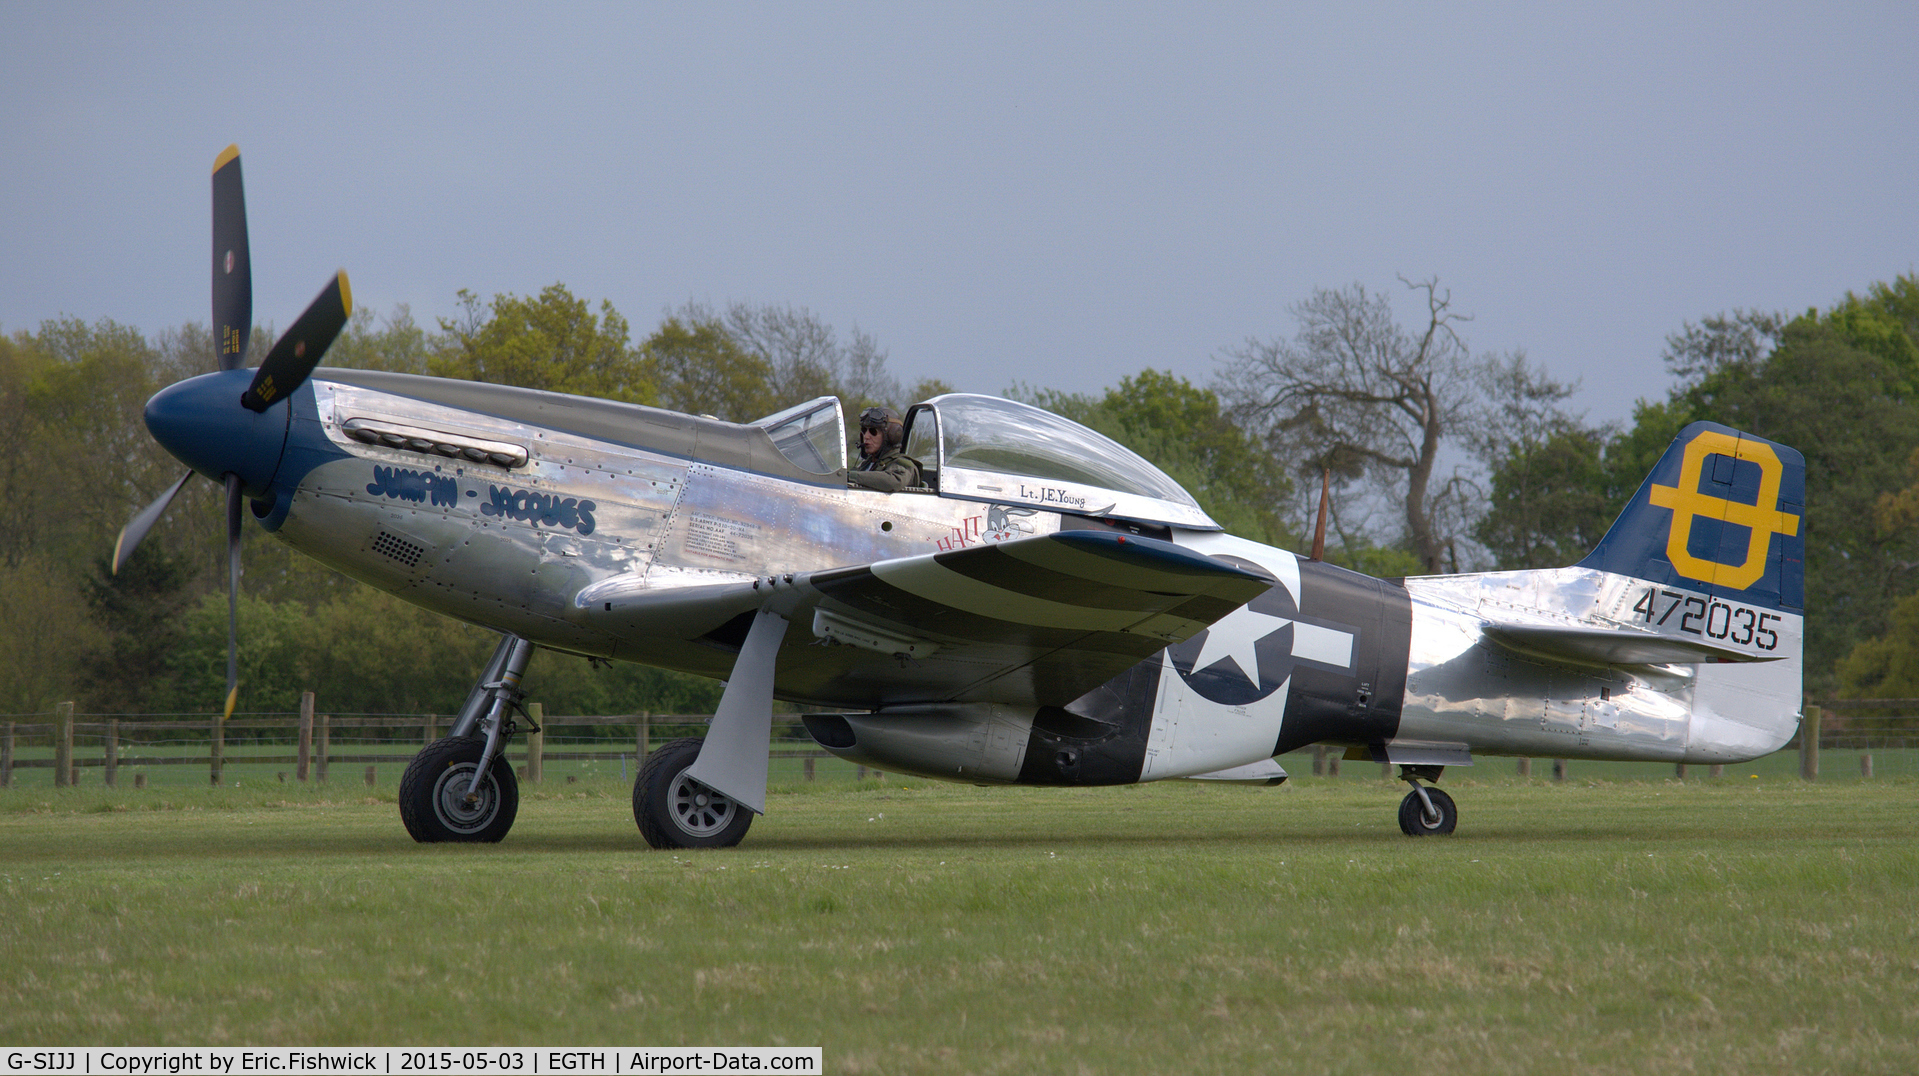 G-SIJJ, 1944 North American P-51D Mustang C/N 122-31894 (44-72035), 1. 472035 at the Shuttleworth VE Day Commemorative Airshow, May 2015